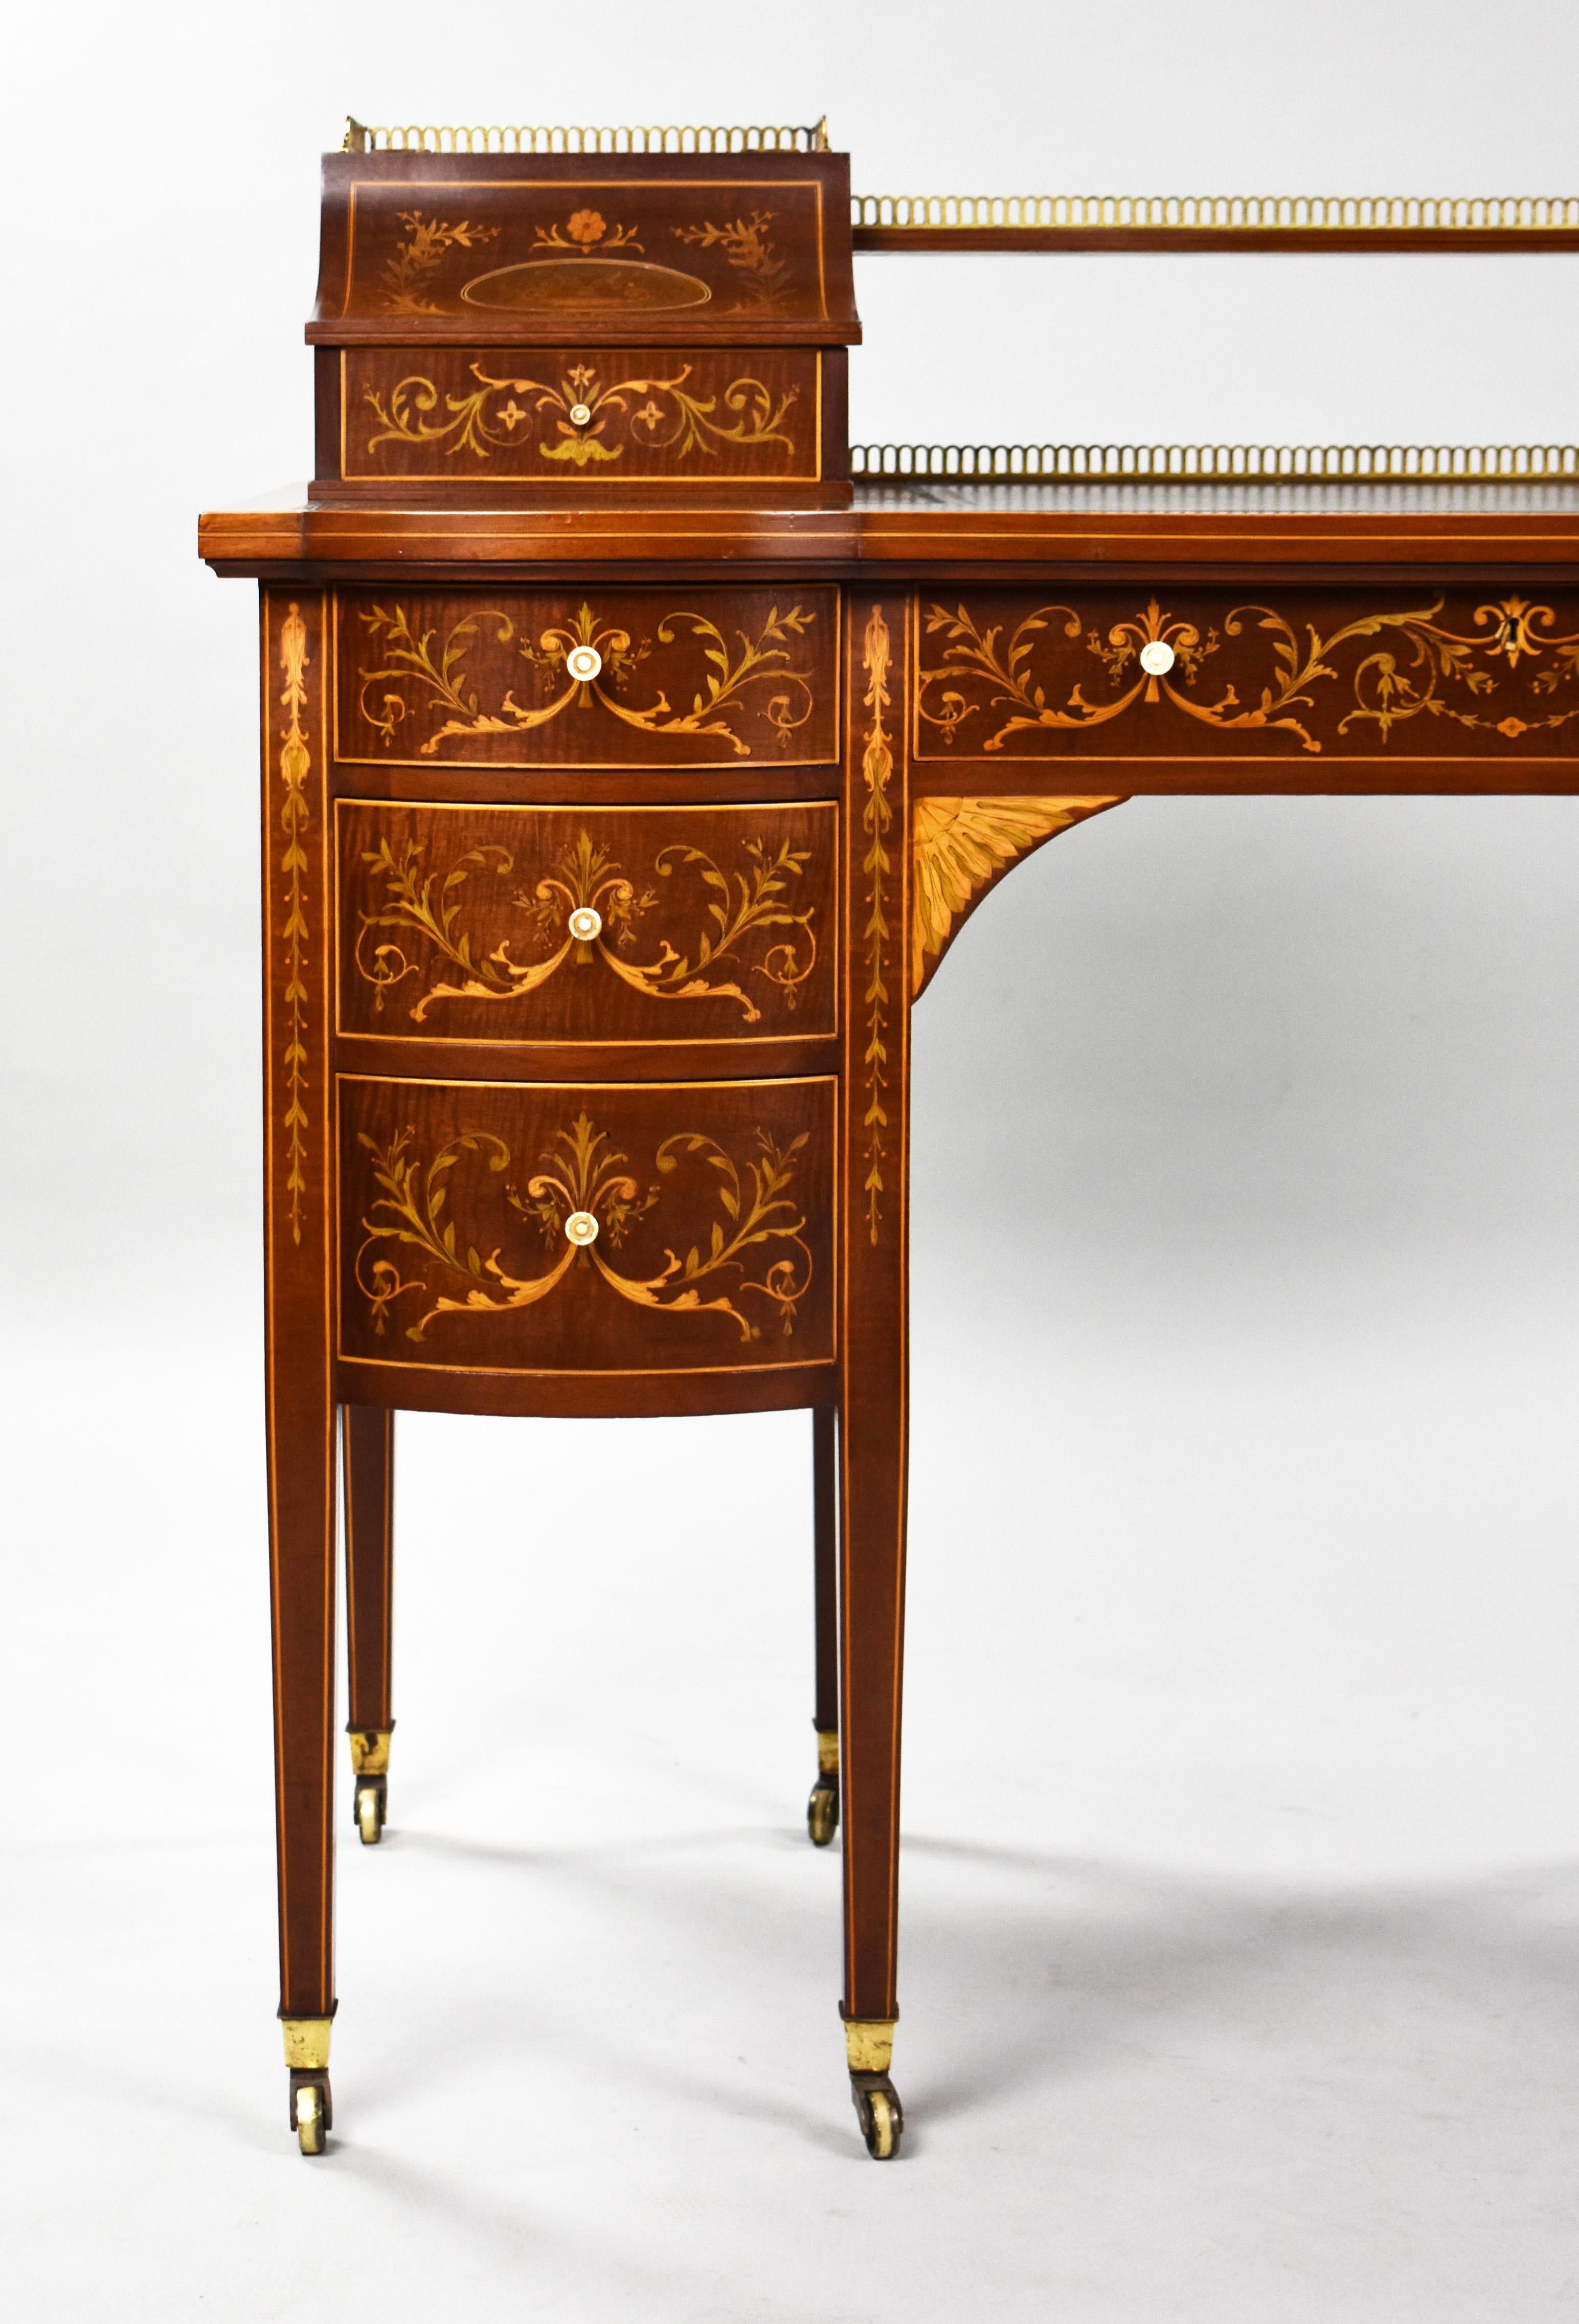 Mahogany 19th Century English Victorian Marquetry Inlaid Carlton House Desk For Sale